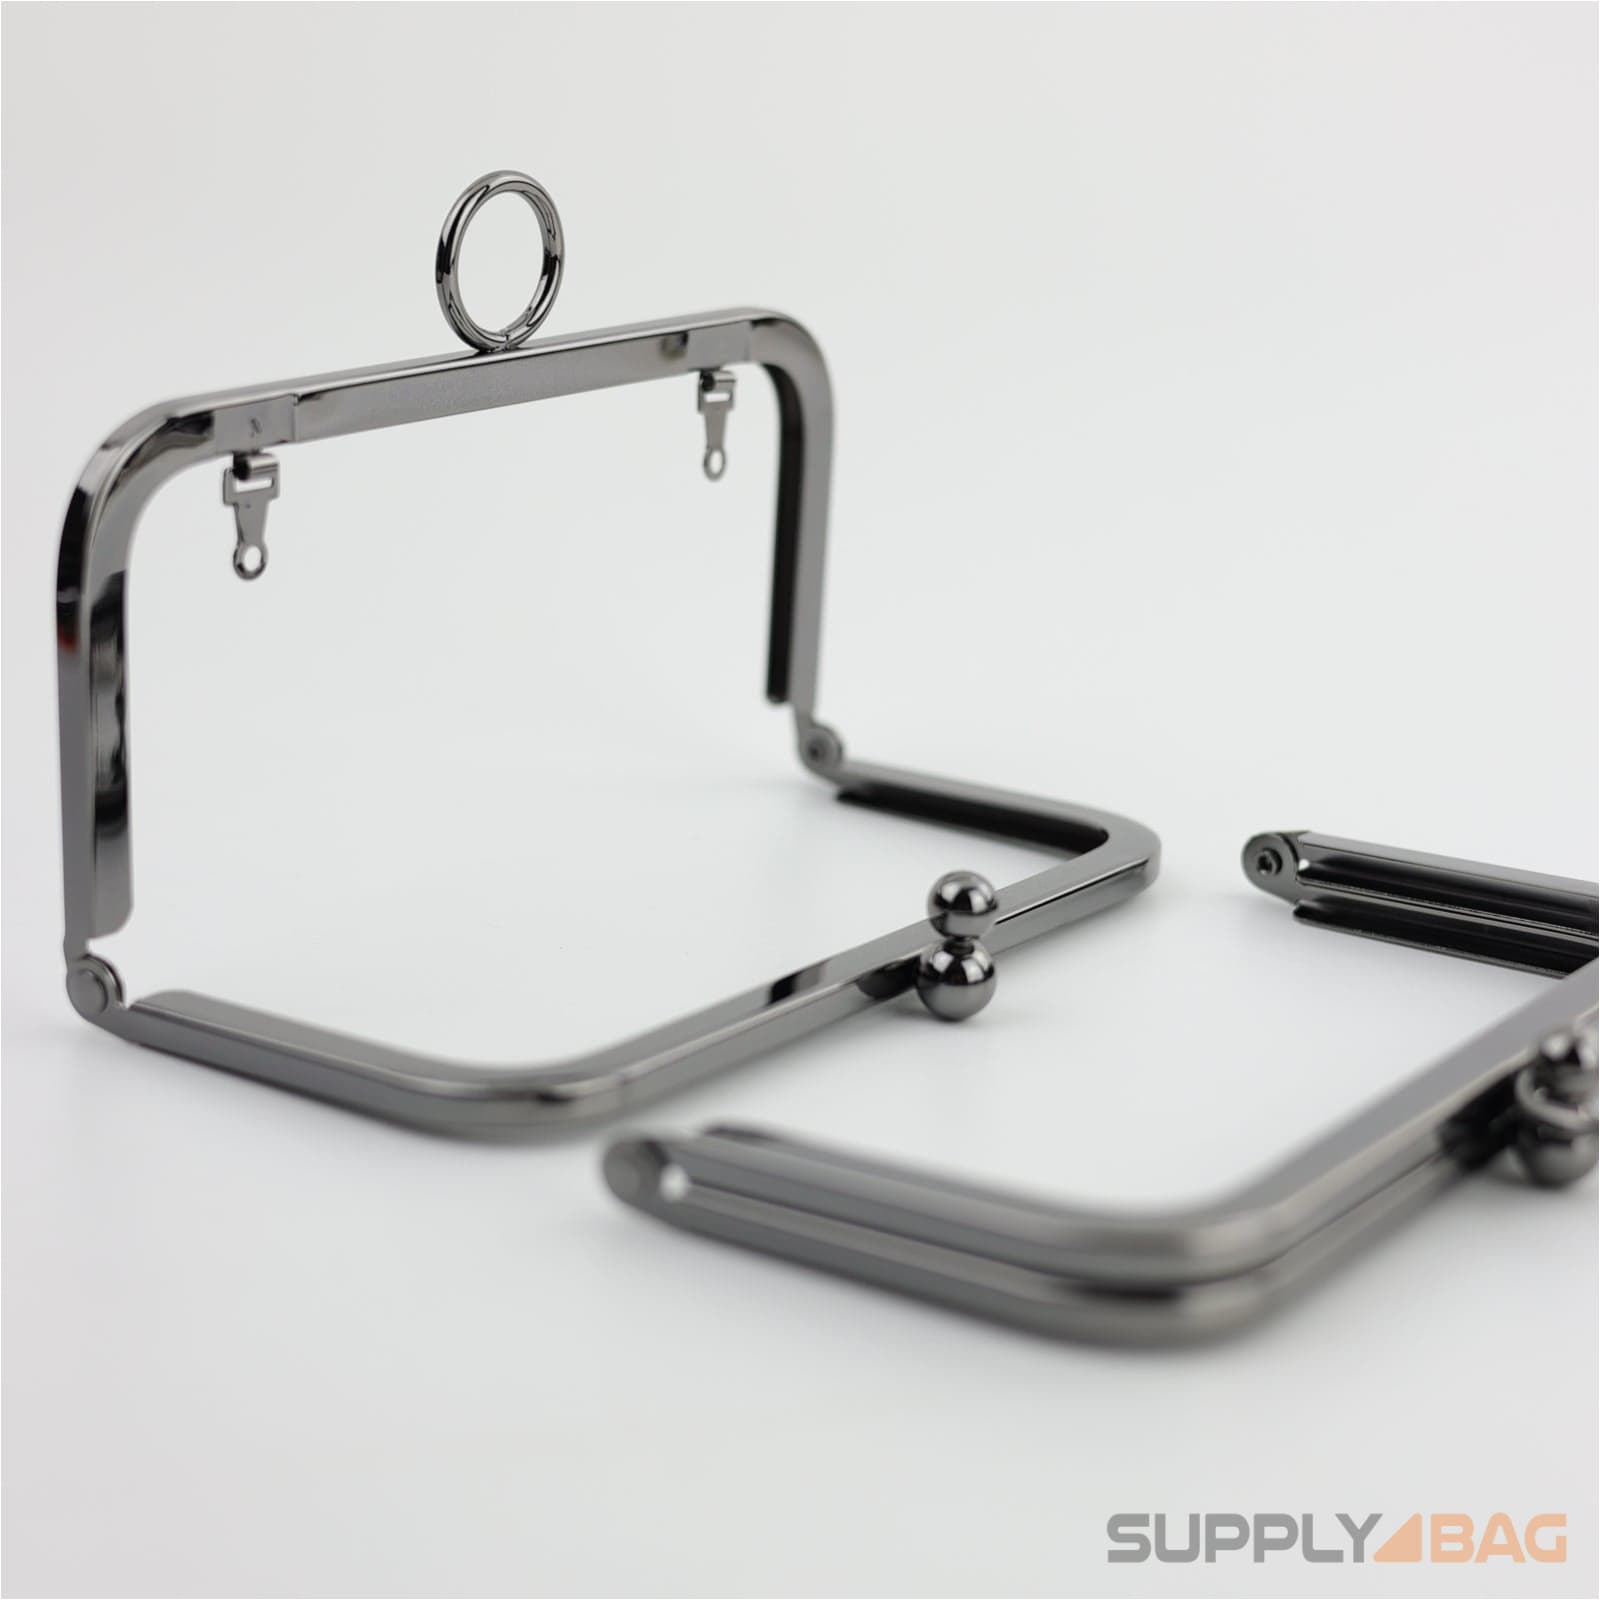 6 x 3 inch - Gunmetal Metal Purse Frame with Chain Loops